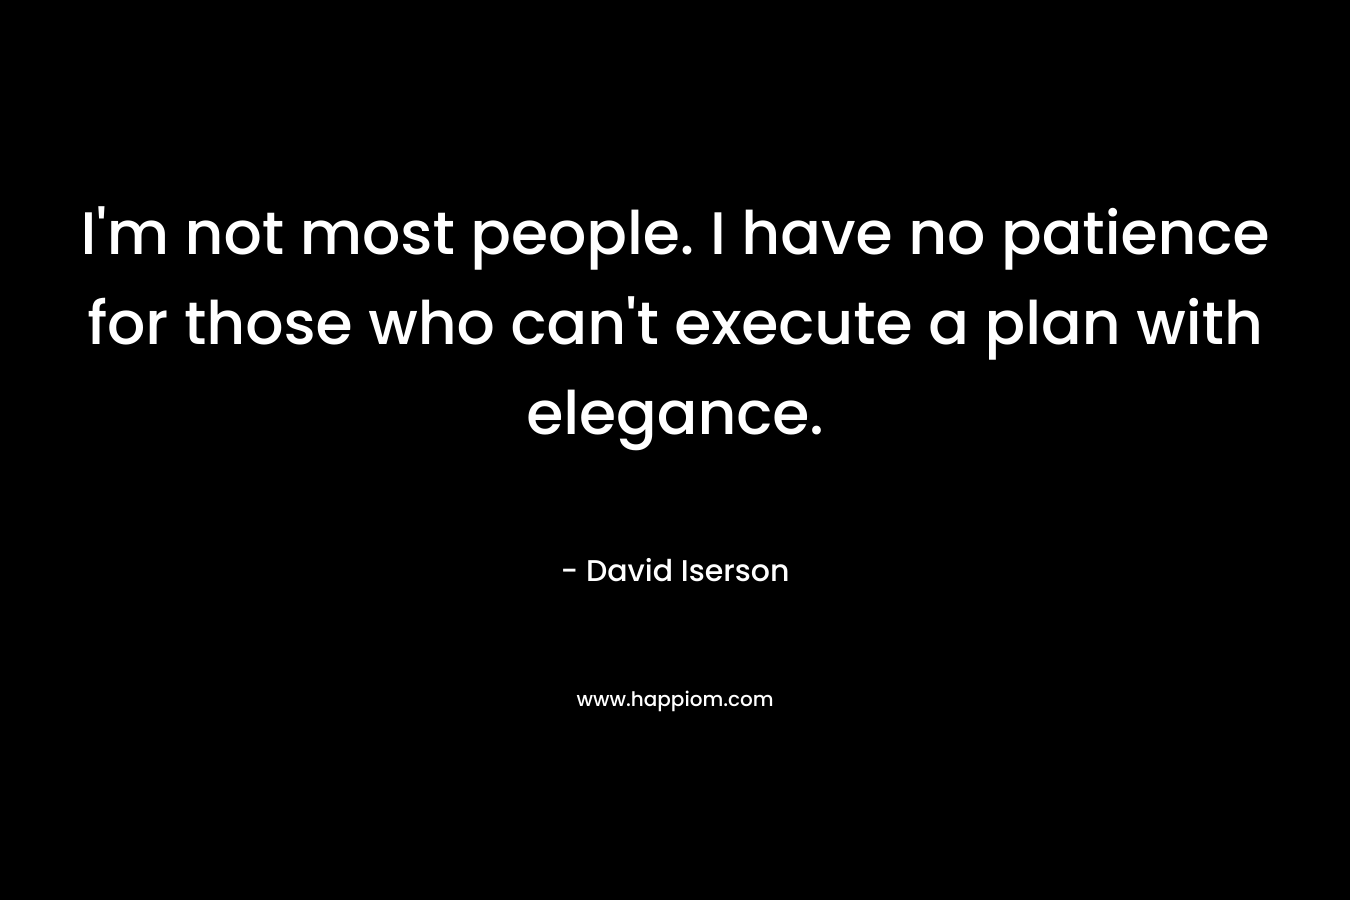 I’m not most people. I have no patience for those who can’t execute a plan with elegance. – David Iserson